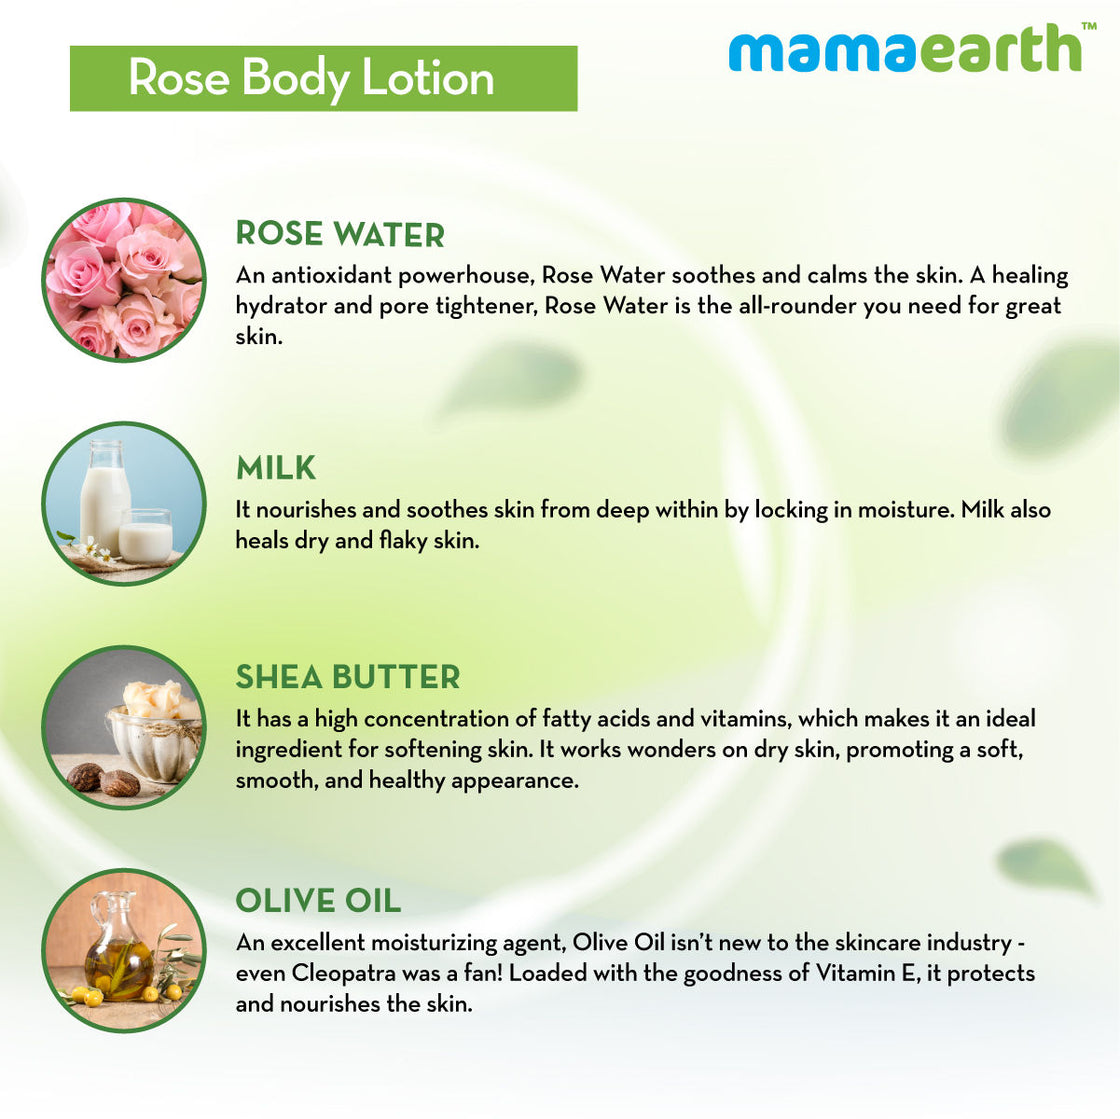 Mamaearth Rose Body Lotion With Rose Water And Milk For Deep Hydration-4